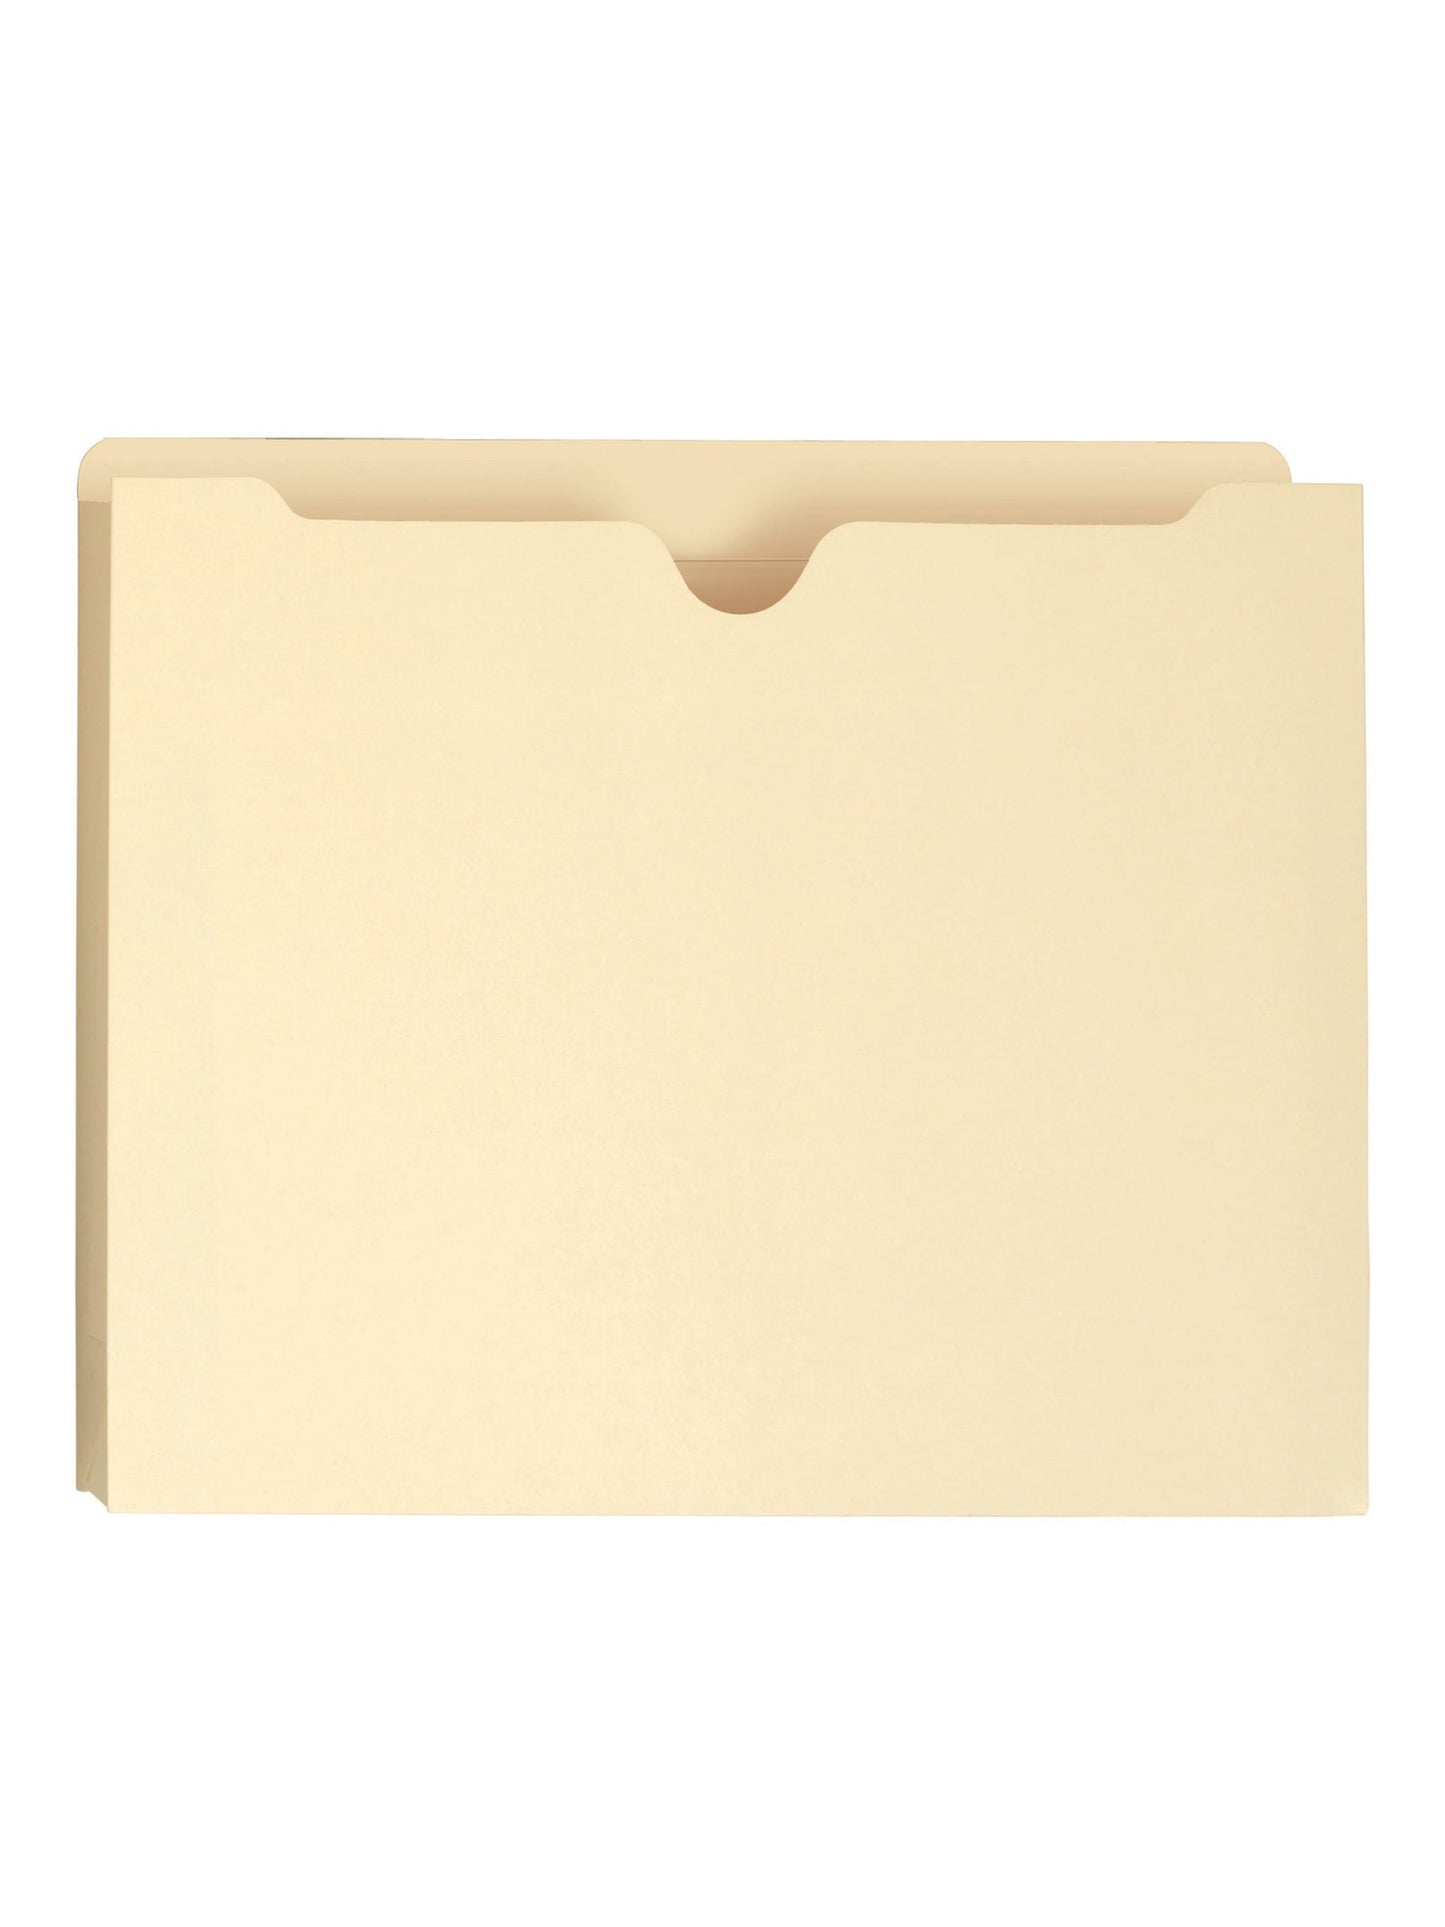 File Jackets, 1 inch Expansion, Straight-Cut Tab, Manila Color, Letter Size, Set of 0, 30086486755208